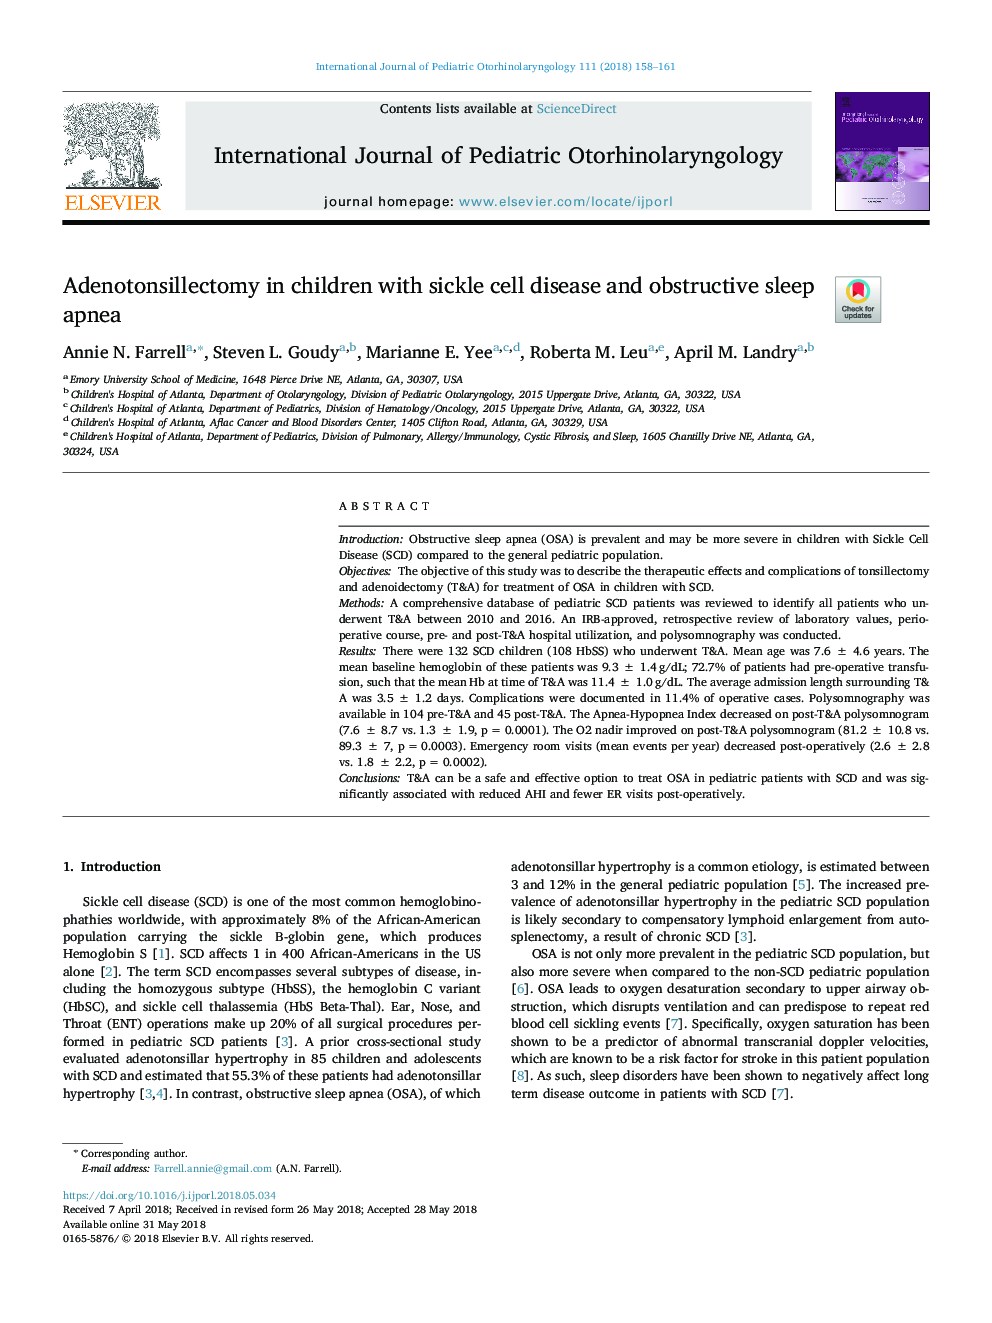 Adenotonsillectomy in children with sickle cell disease and obstructive sleep apnea